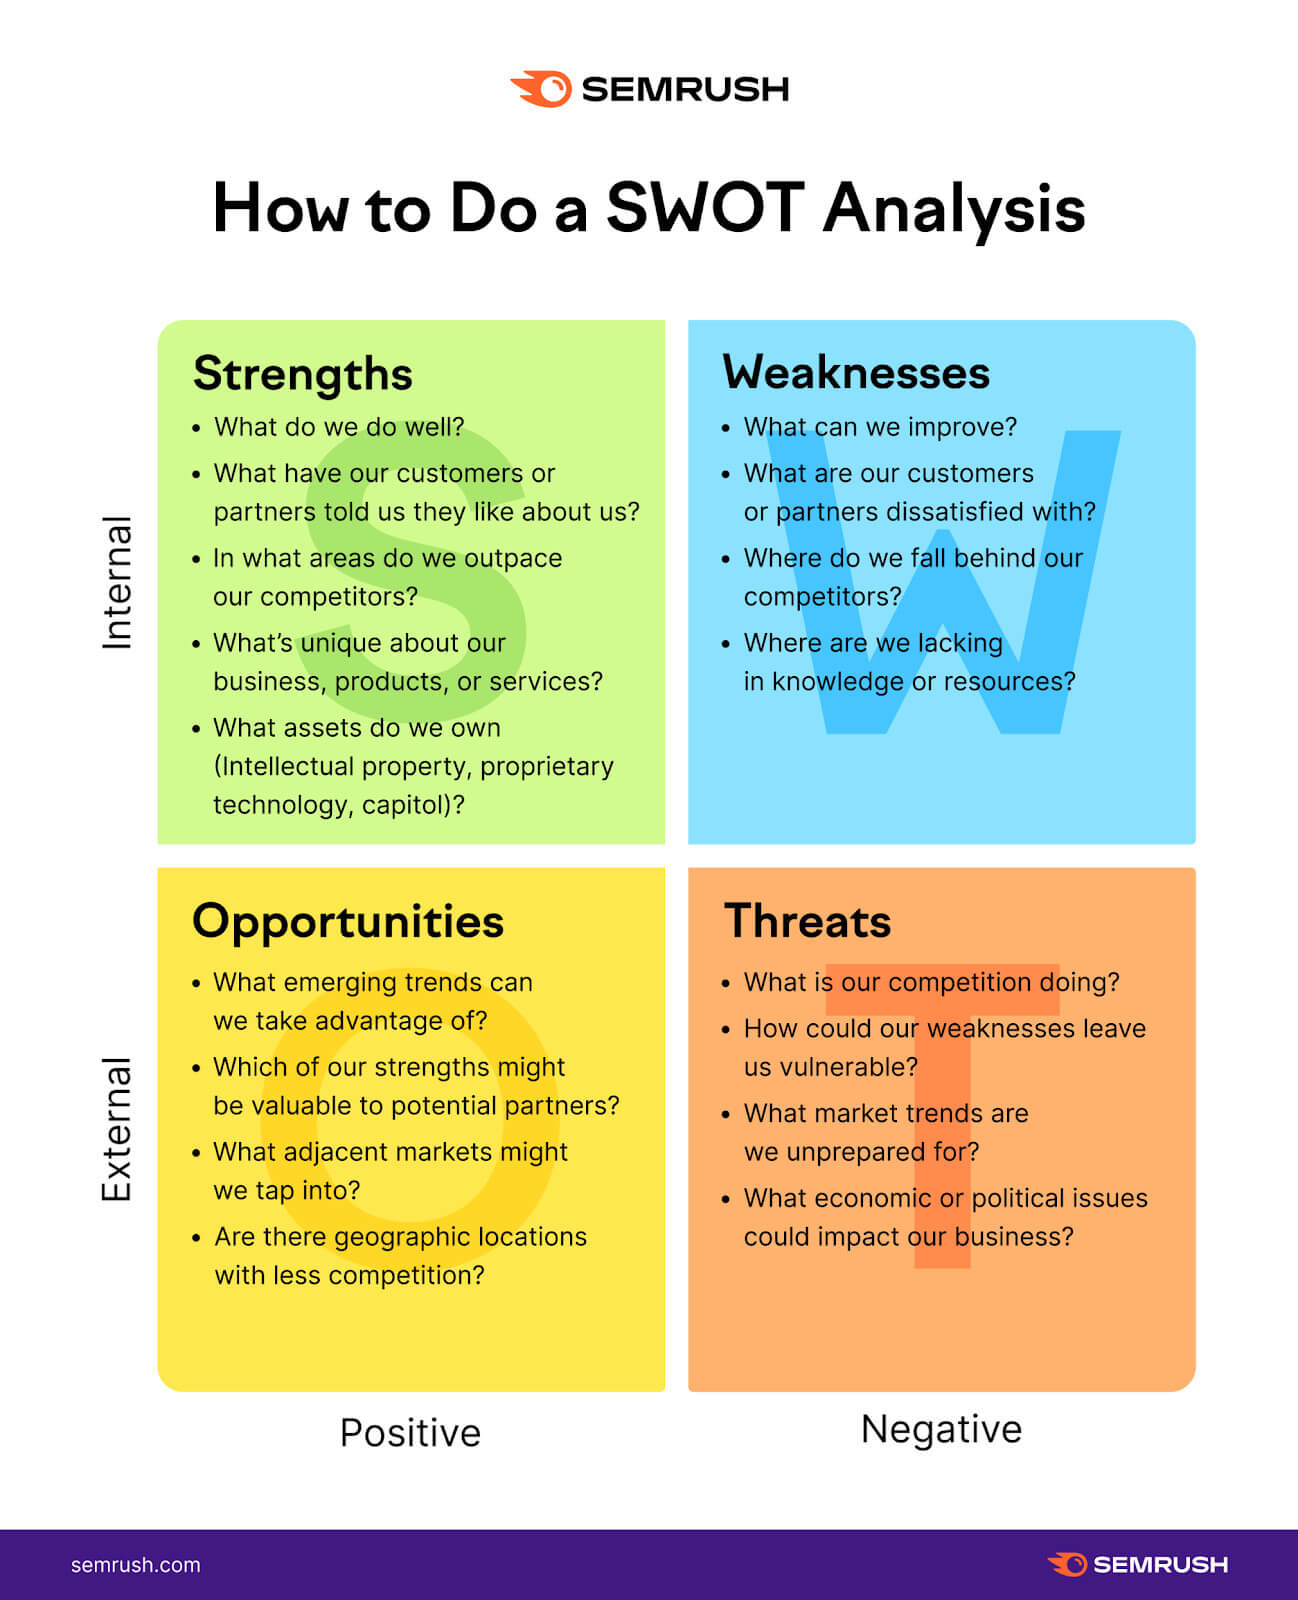 An infographic on how to do a SWOT analysis